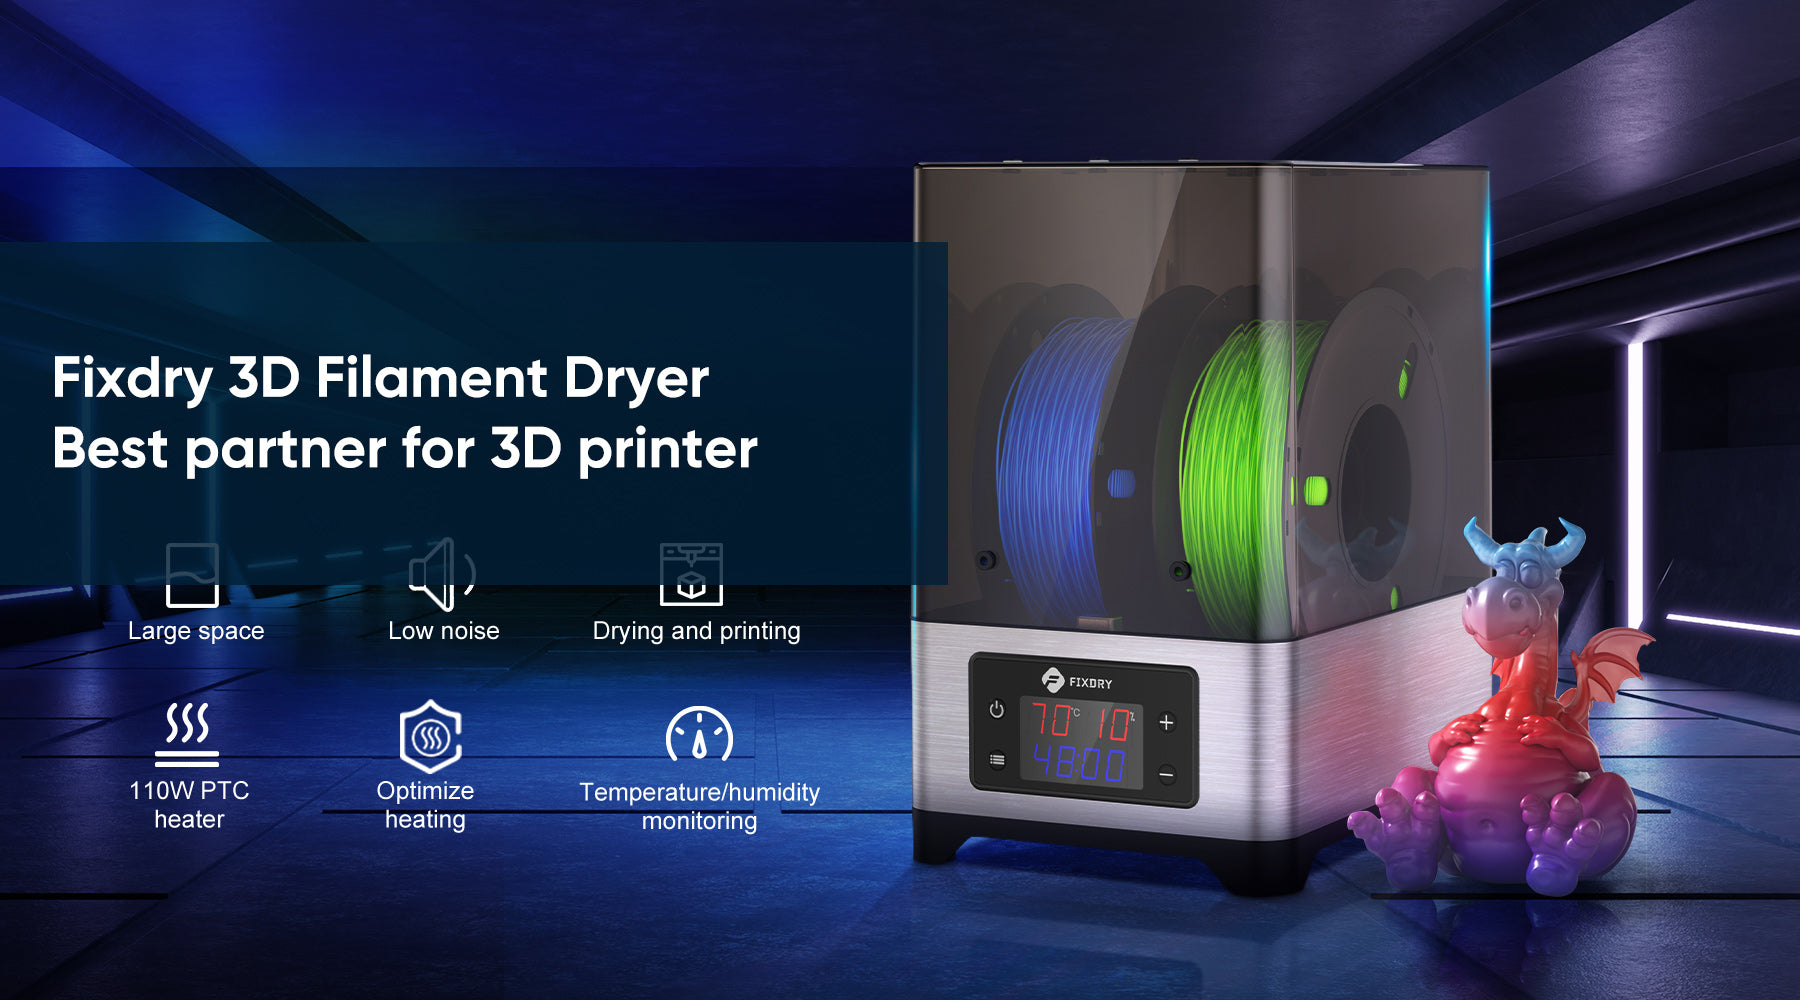 How long does it take different filament to dry in a filament dryer box?